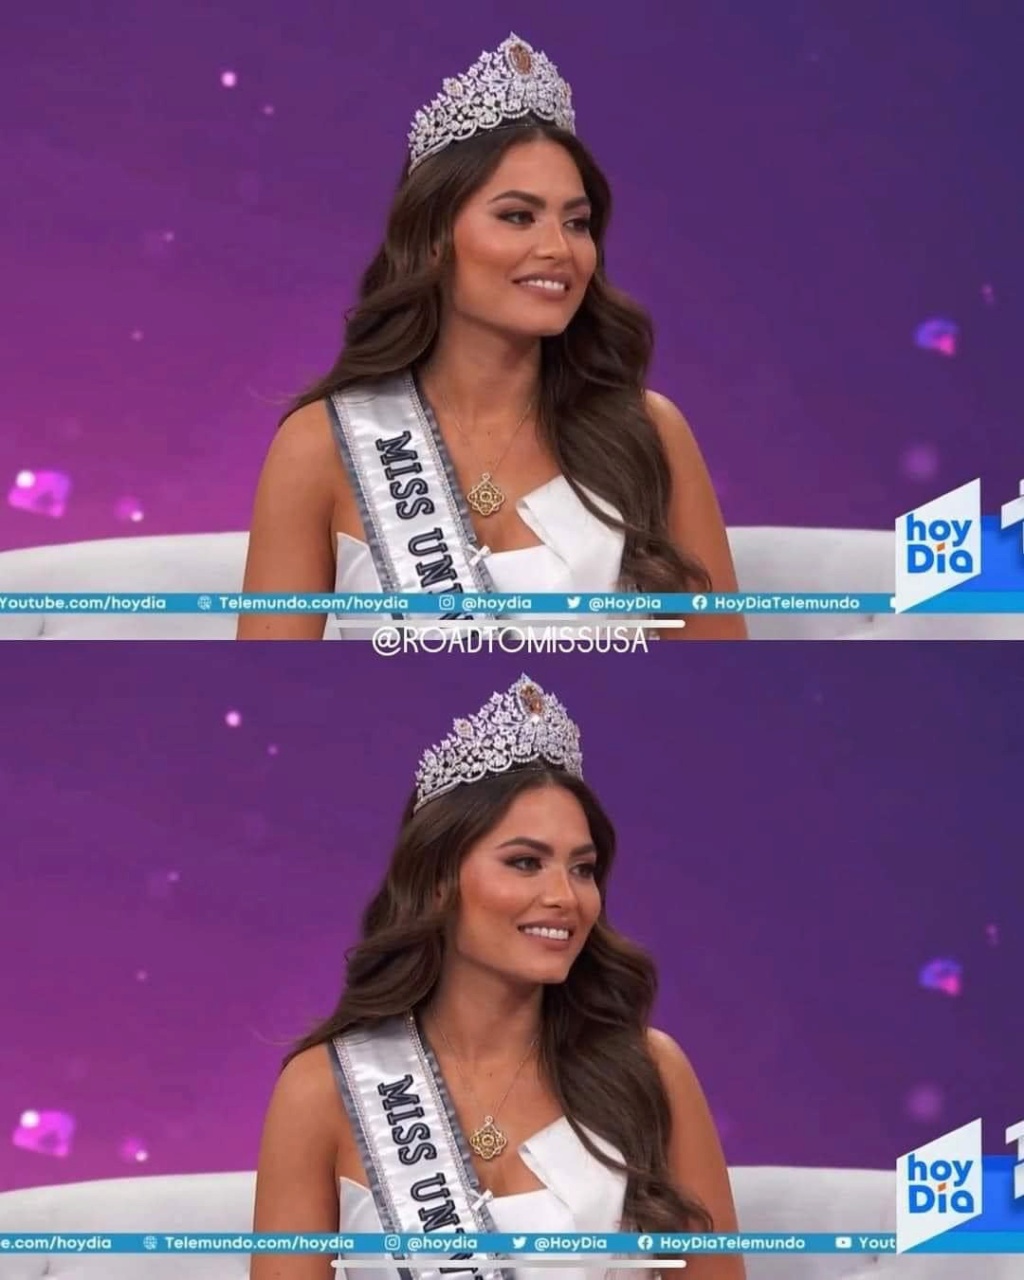 The Official Thread Of Miss Universe 2020 - Andrea Meza of Mexico  18730110